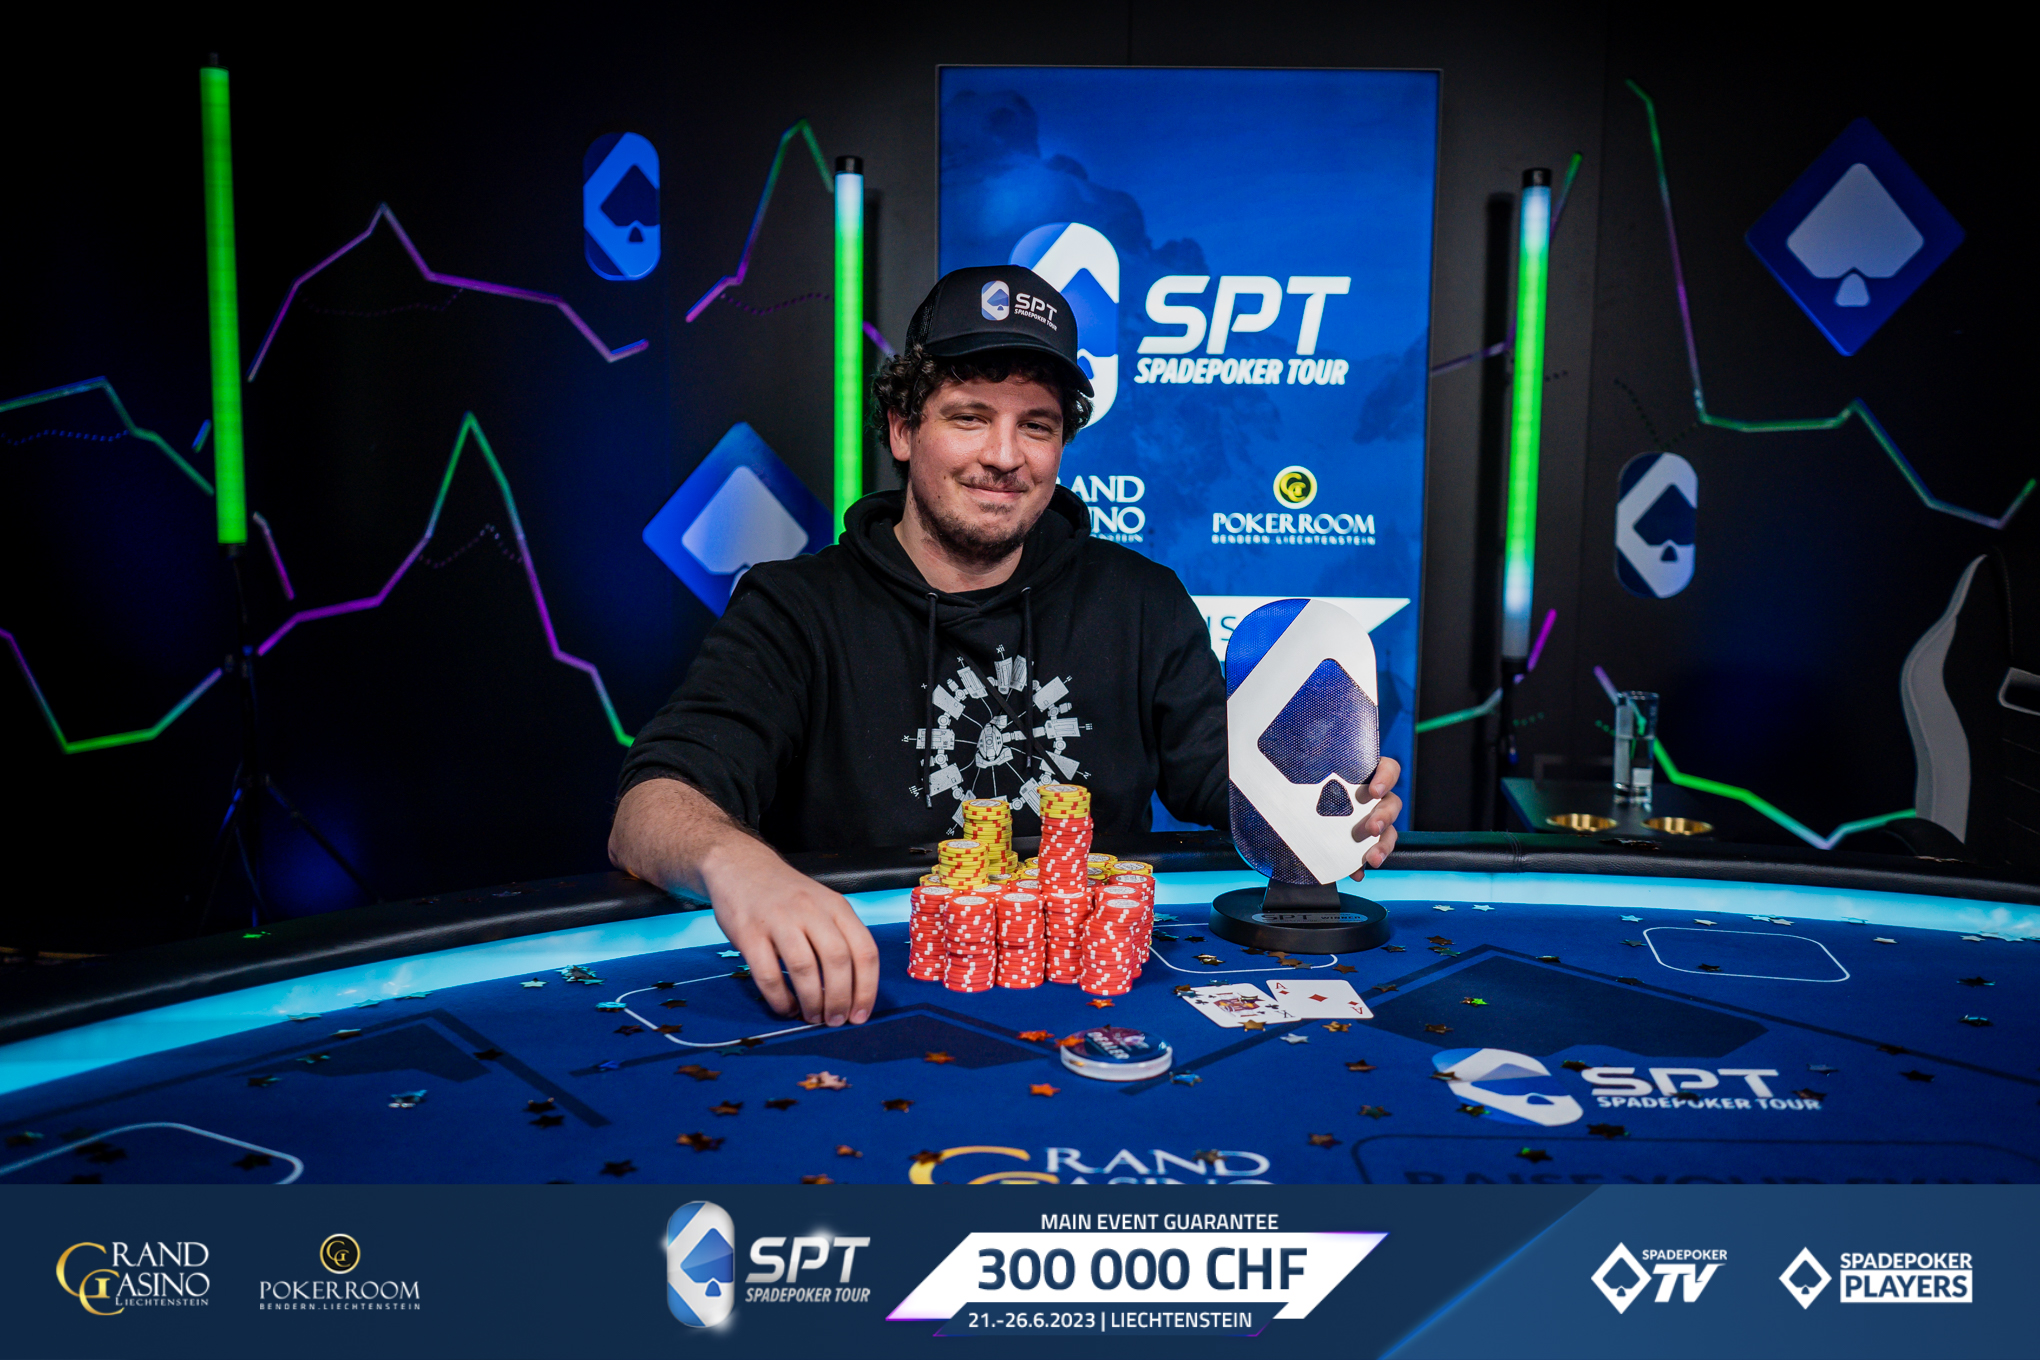 SPT champion Arduini: The amount of my winnings doesn't affect me, I invest most of it back into poker 